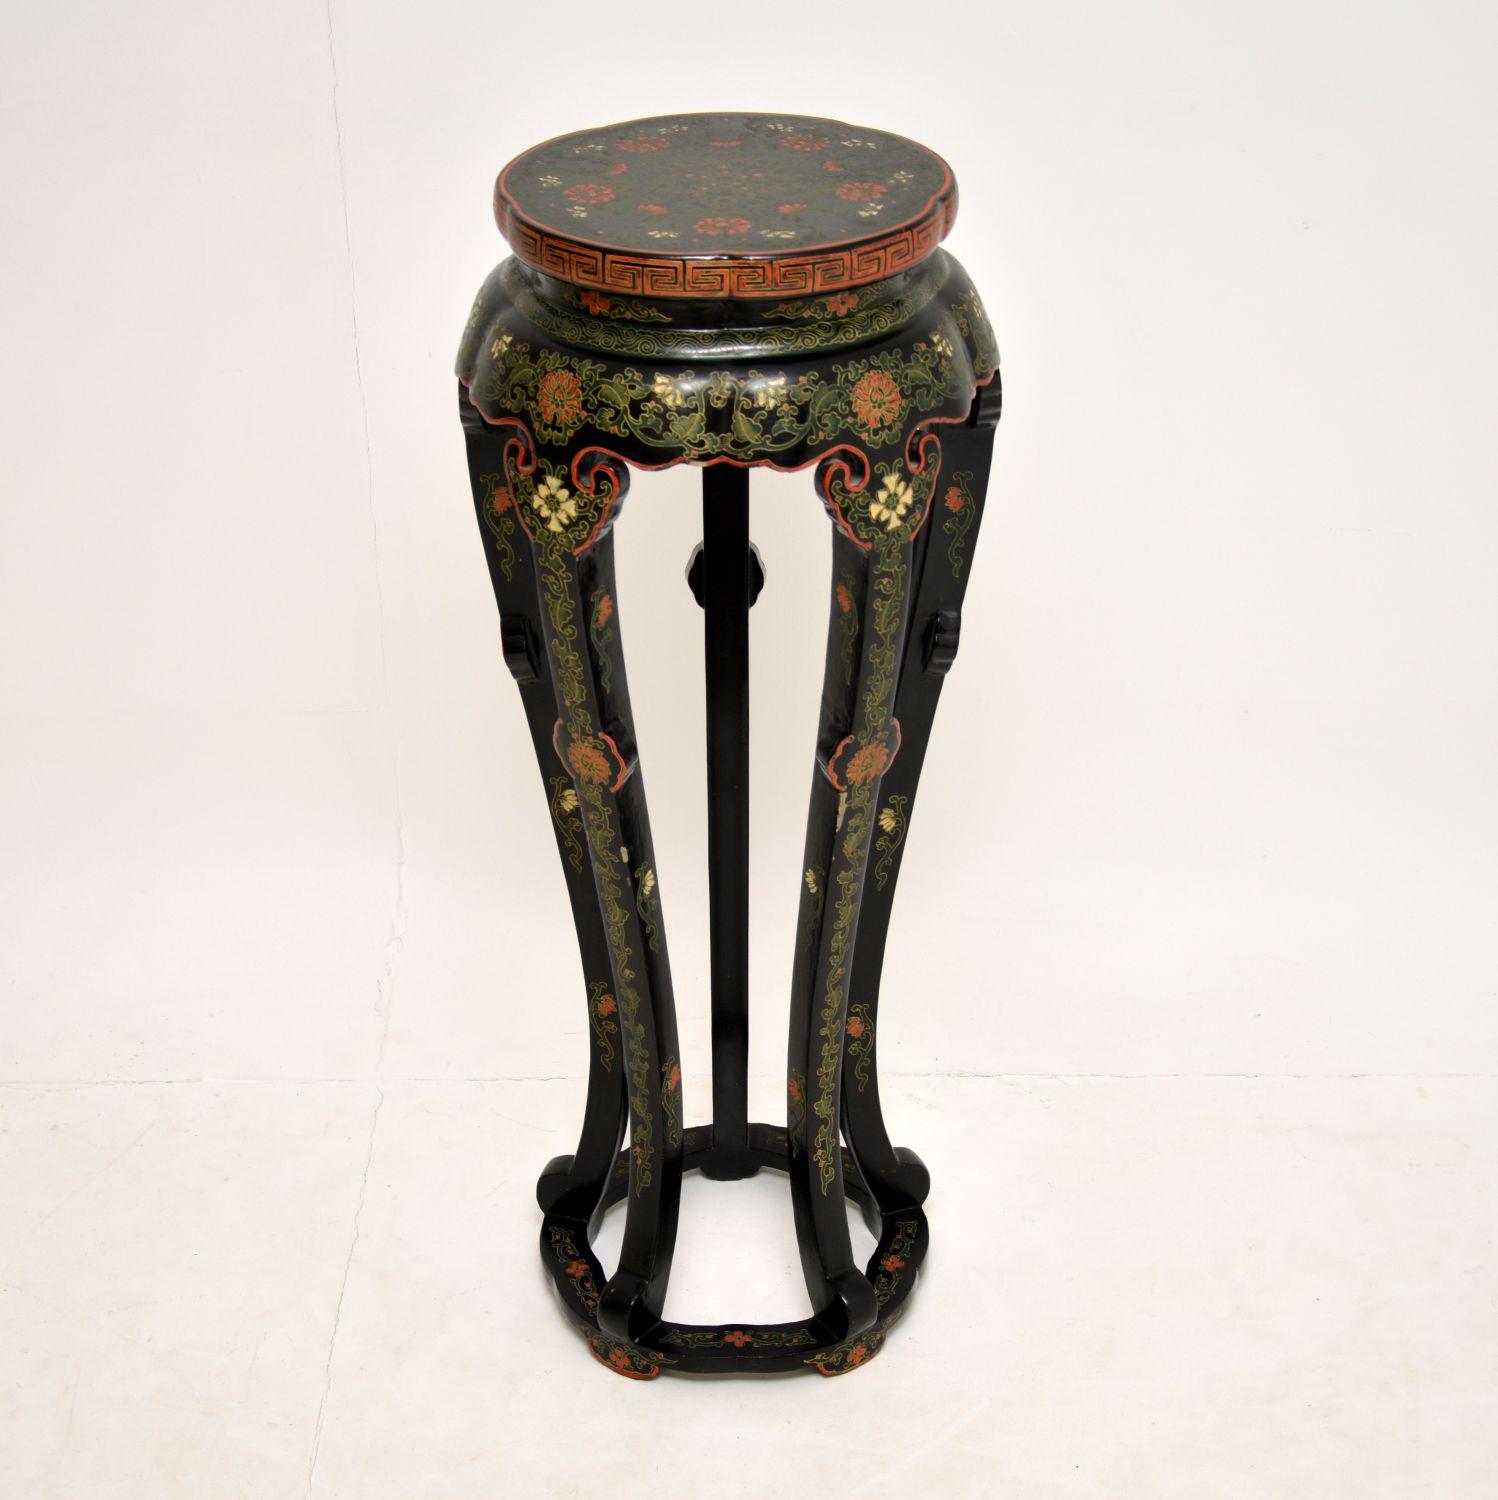 An exquisitely beautiful chinoiserie plant stand, in the antique Chinese style, which I would date from around the 1950’s period.

It is beautifully made and of excellent quality, with stunning decorations all over & very colourful.

It is a